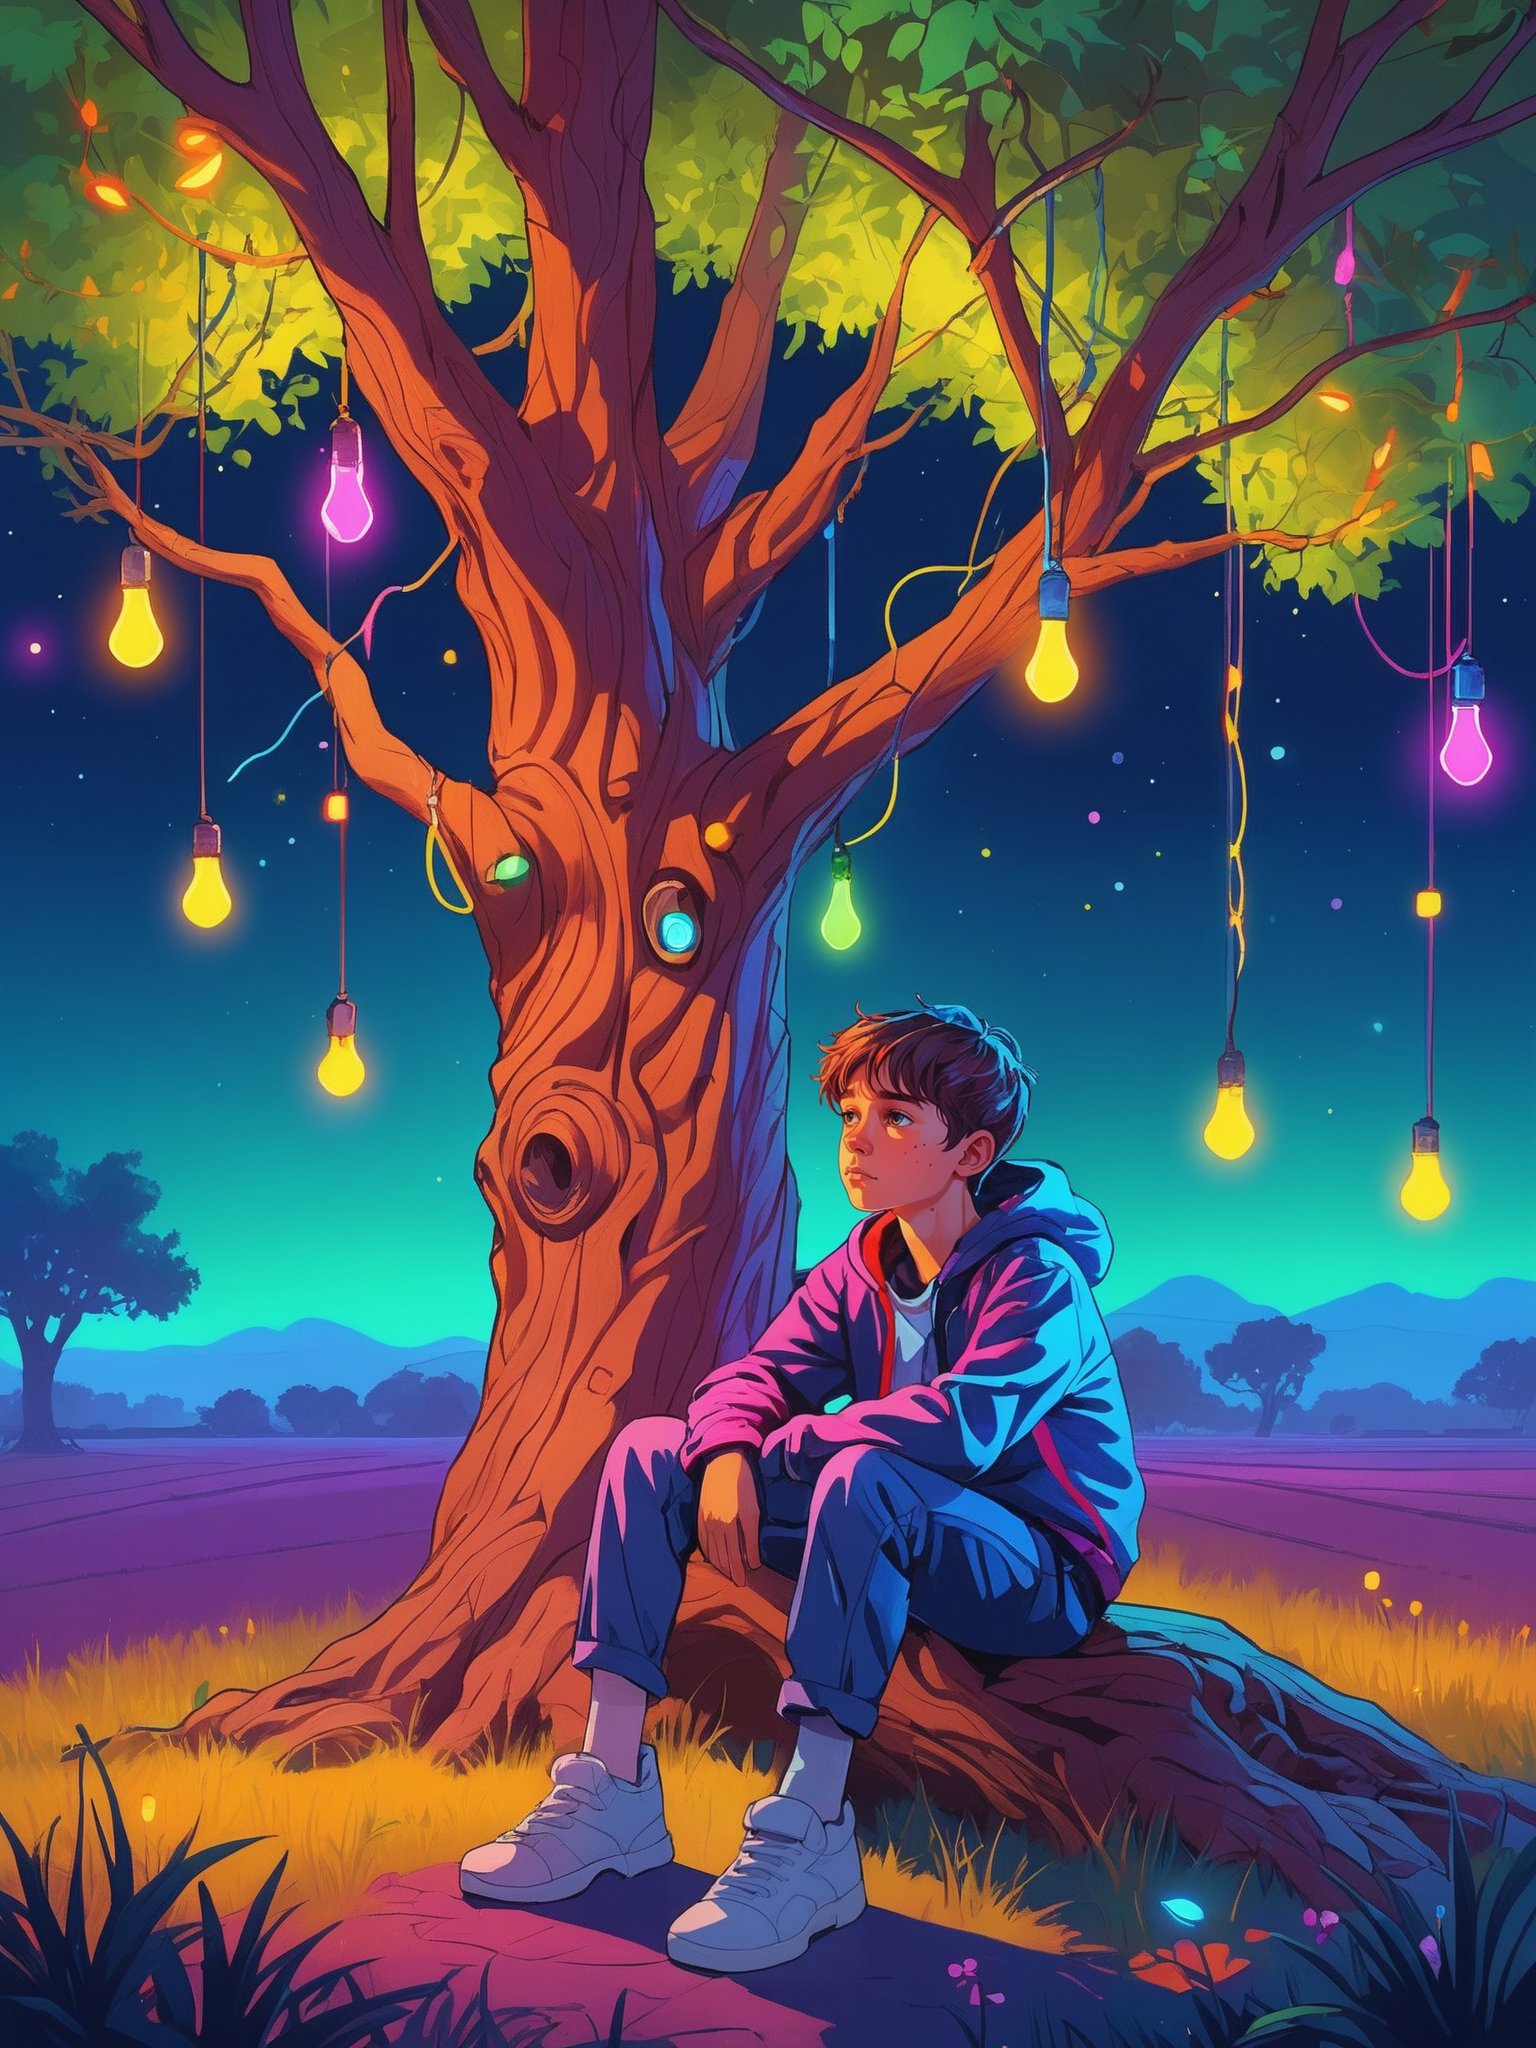 2D colorful illustration of a boy sitting against a tree, neon colors, pensive, sad, thinking about the future, vegetation and fields, lightbulbs and garlands in tree